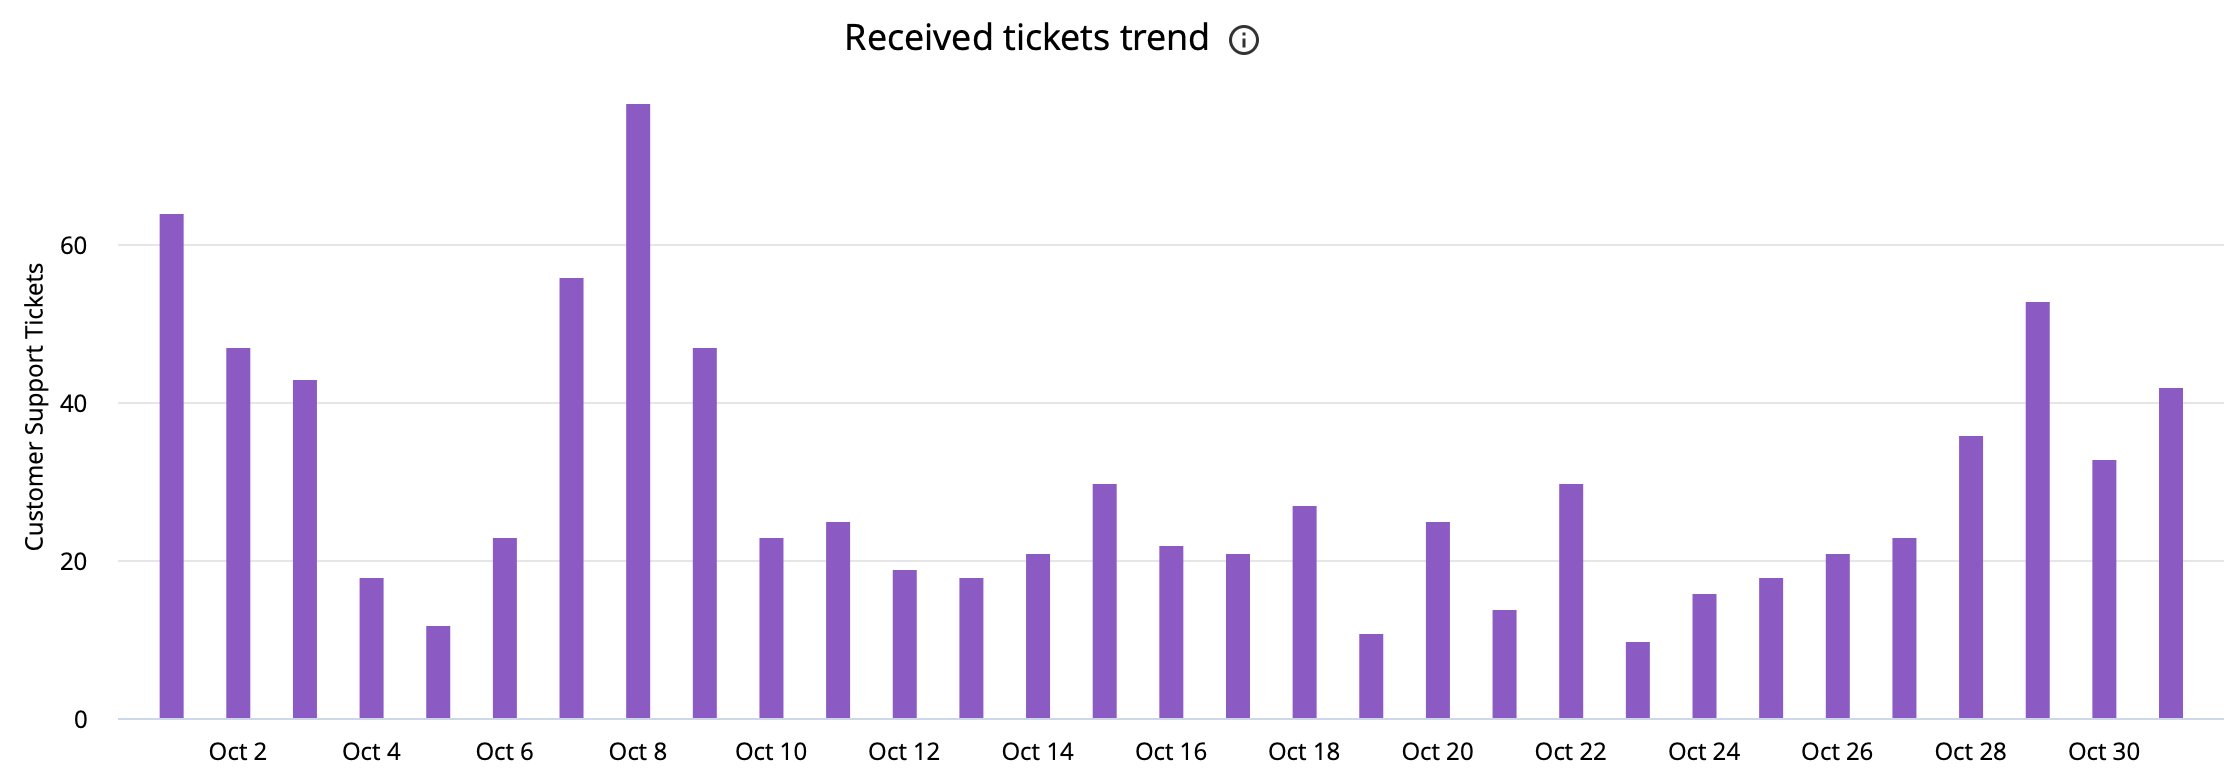 Customer Support dashboard - Tickets received